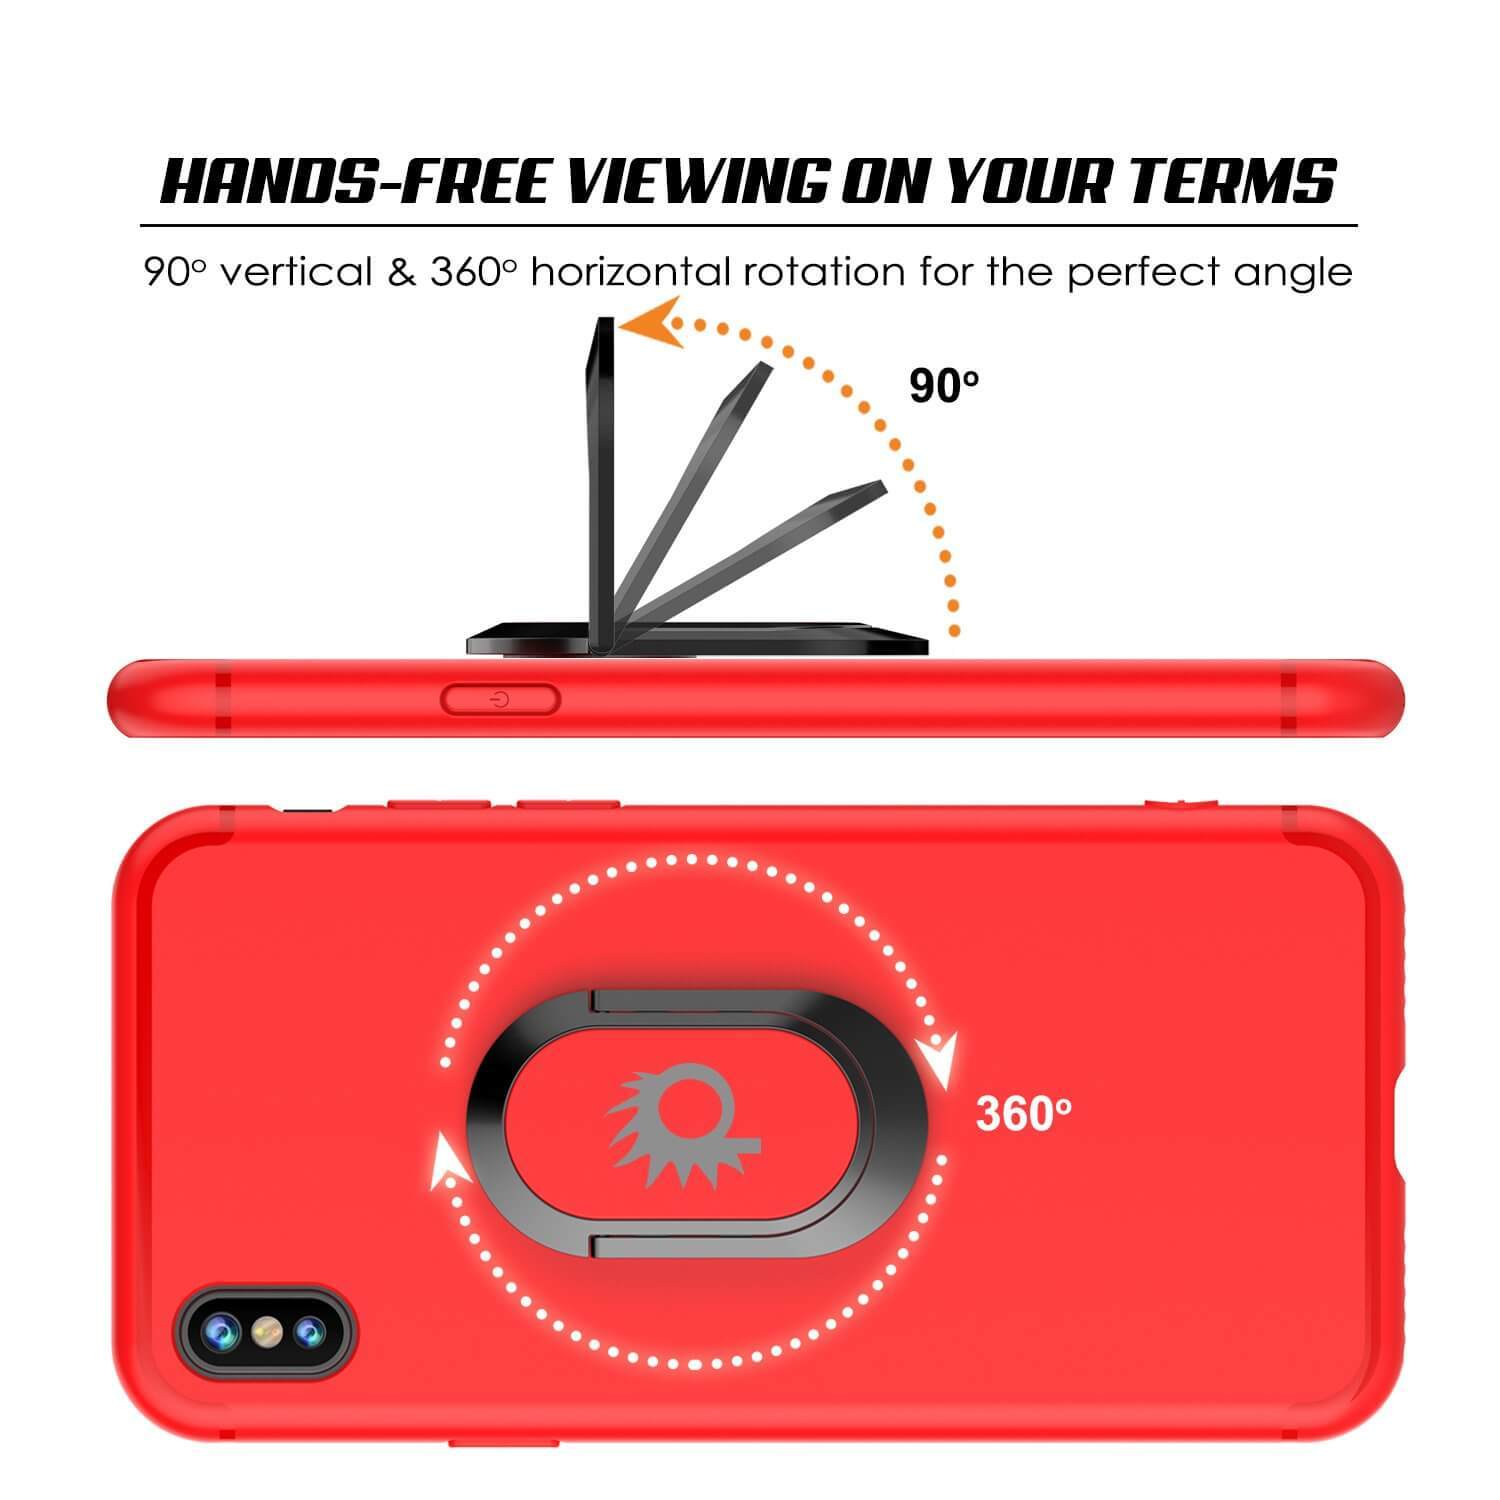 iPhone XS Case, Punkcase Magnetix Protective TPU Cover W/ Kickstand, Tempered Glass Screen Protector [Red] - PunkCase NZ